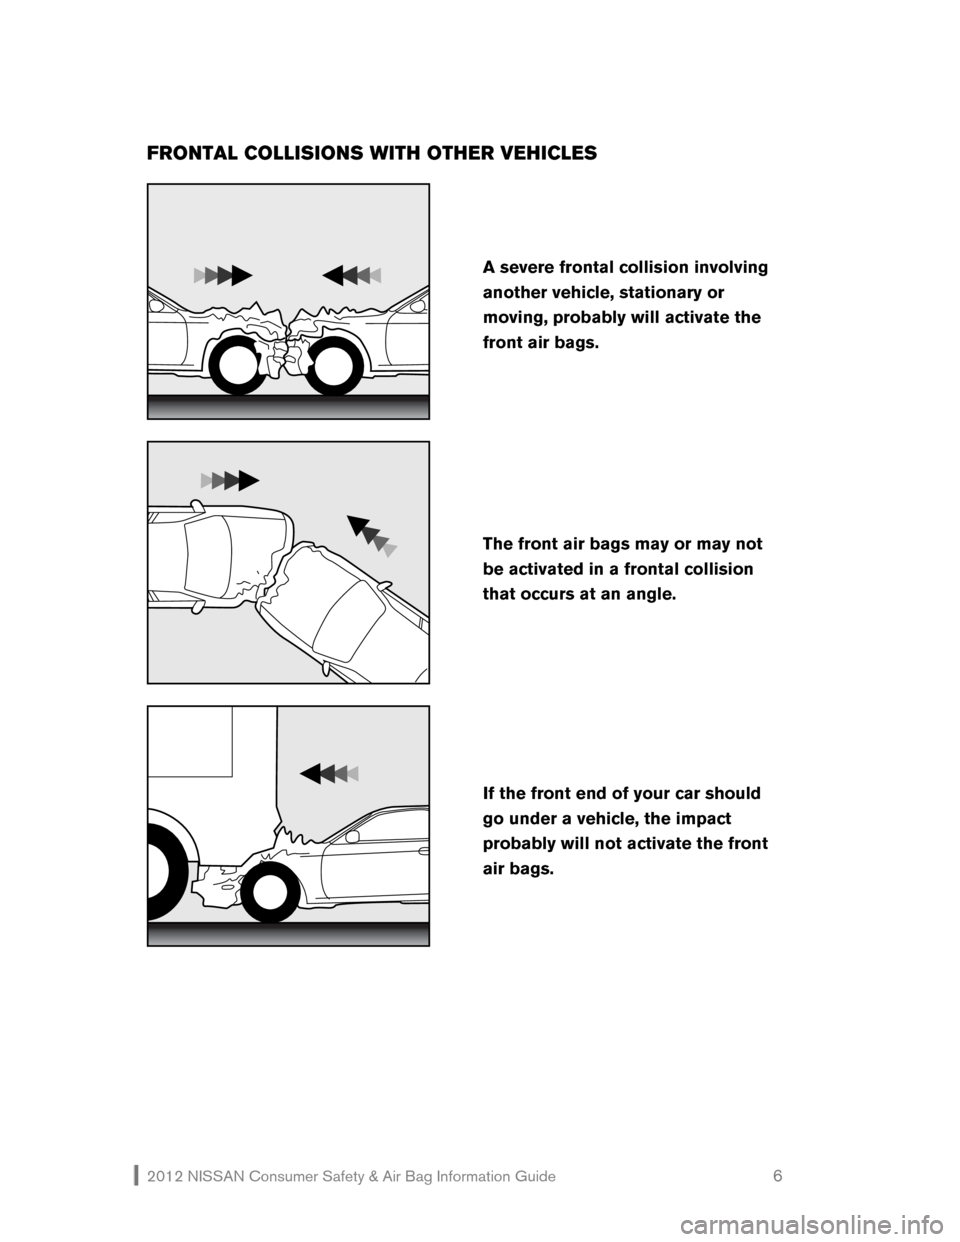 NISSAN CUBE 2012 3.G Consumer Safety Air Bag Information Guide 2012 NISSAN Consumer Safety & Air Bag Information Guide                                                   6 
FRONTAL COLLISIONS WITH OTHER VEHICLES 
 
 
 
 
If the front end of your car should 
go und